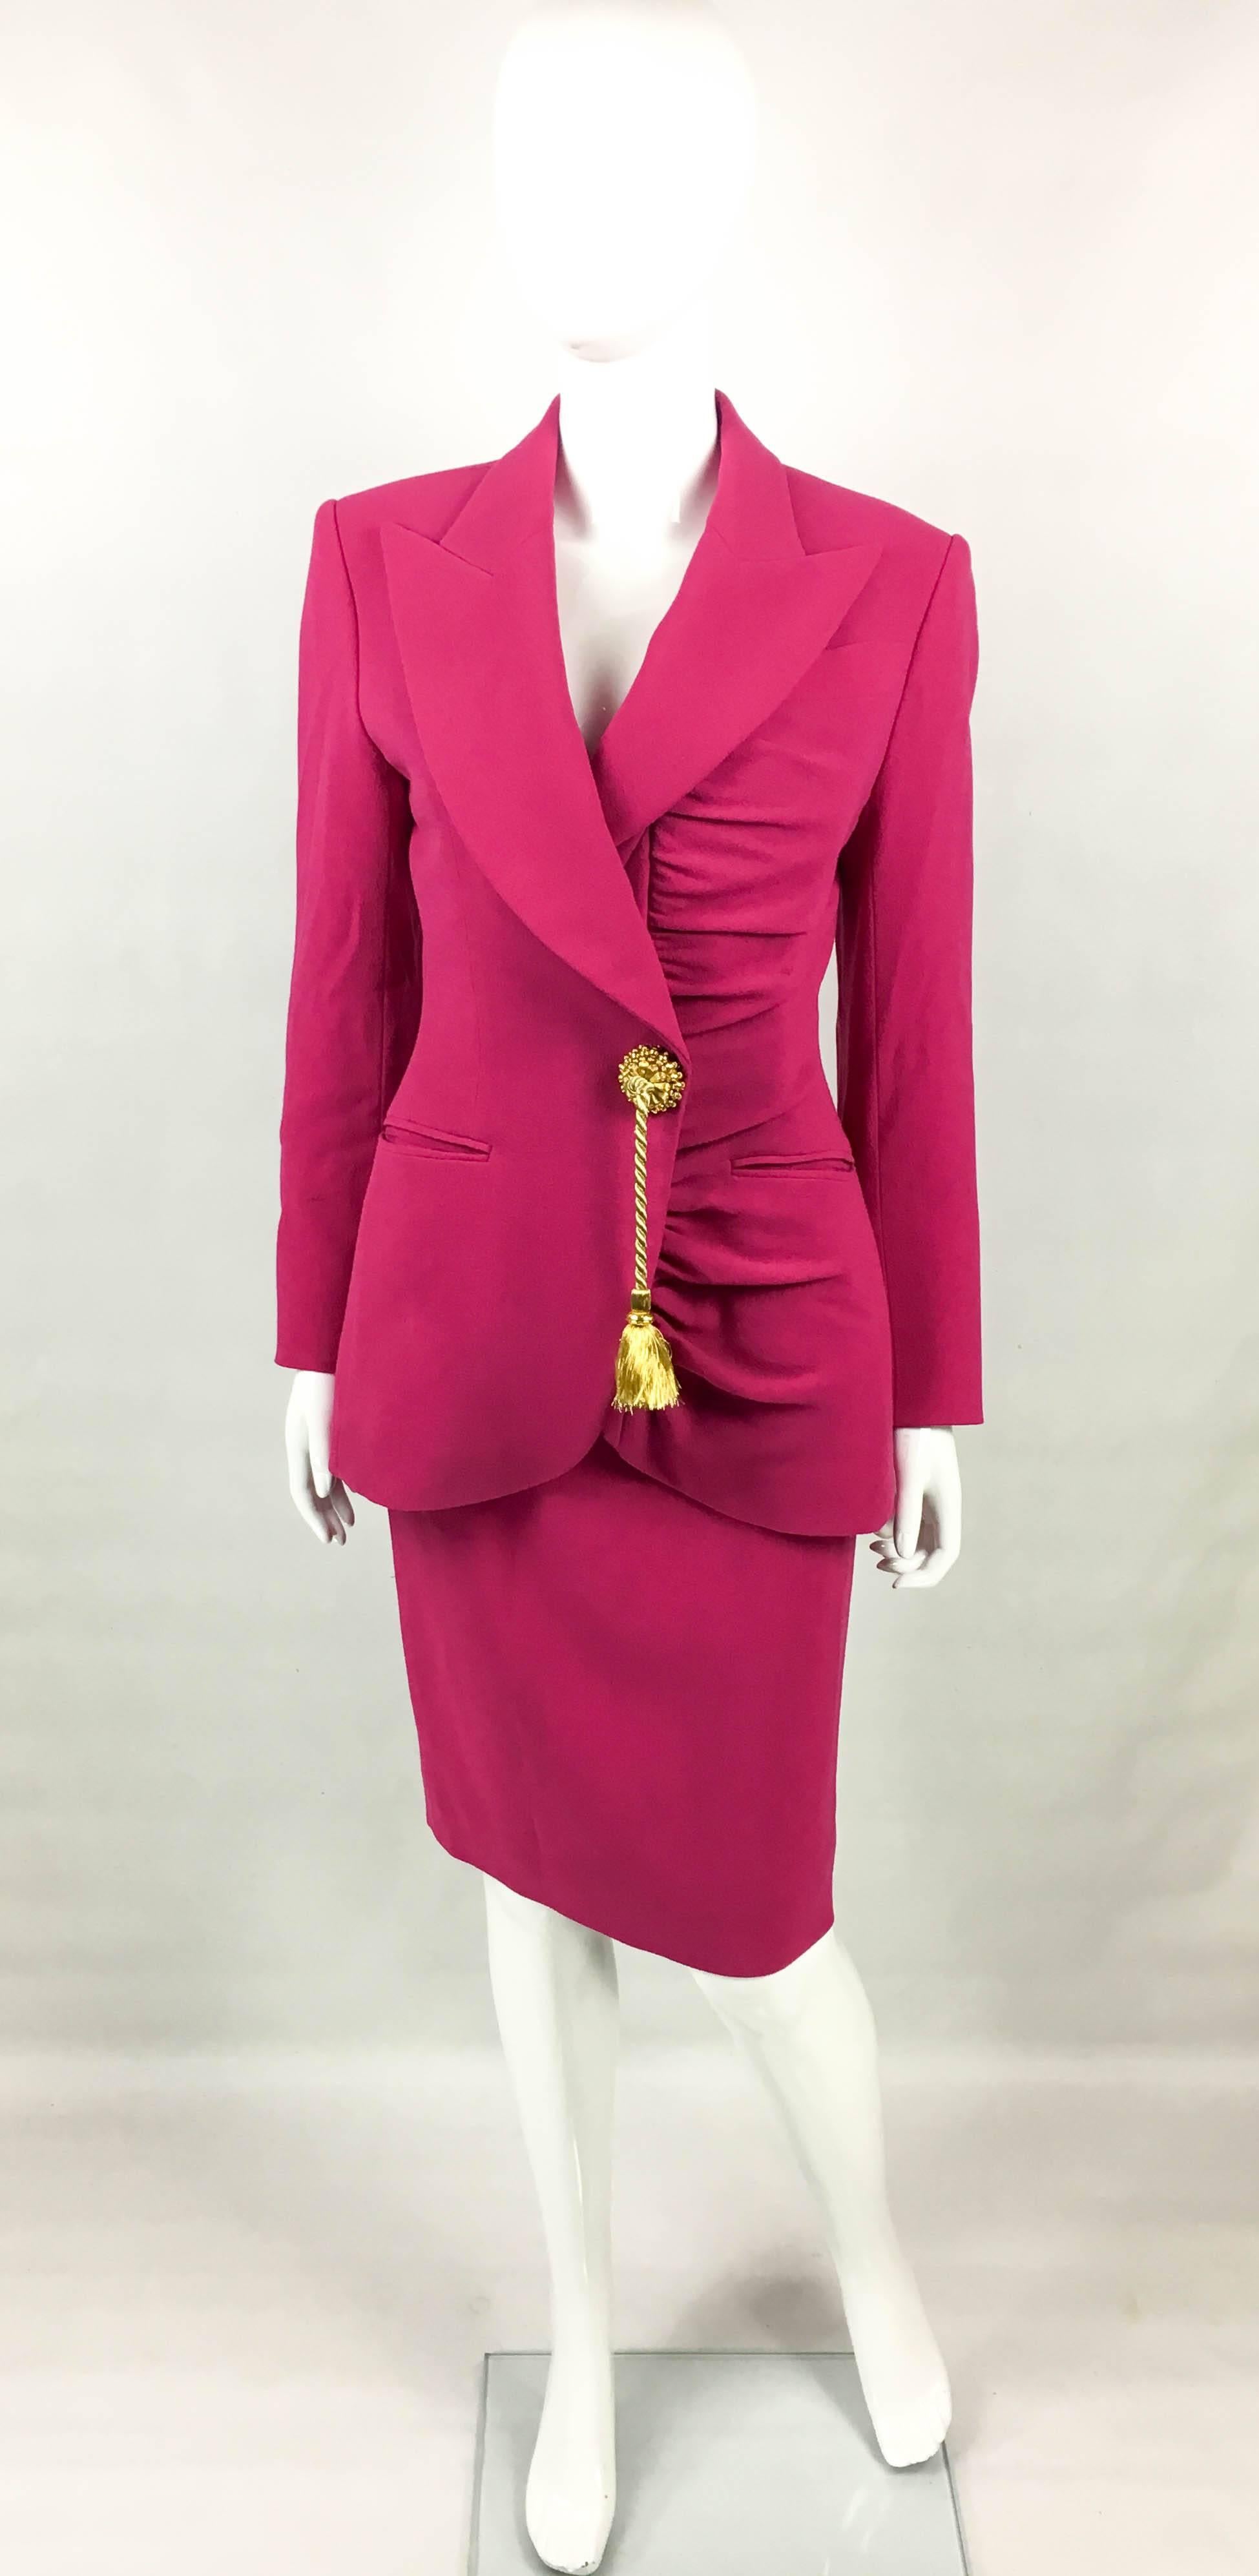 Stunning Vintage Dior Demi-Couture Wool Crepe Skirt Suit. This fabulous numbered ensemble by Dior was created in the 1980s. Both pieces are labelled and numbered – jacket: 53541; skirt: 22232. Made in shocking pink wool crepe, it is fully lined in